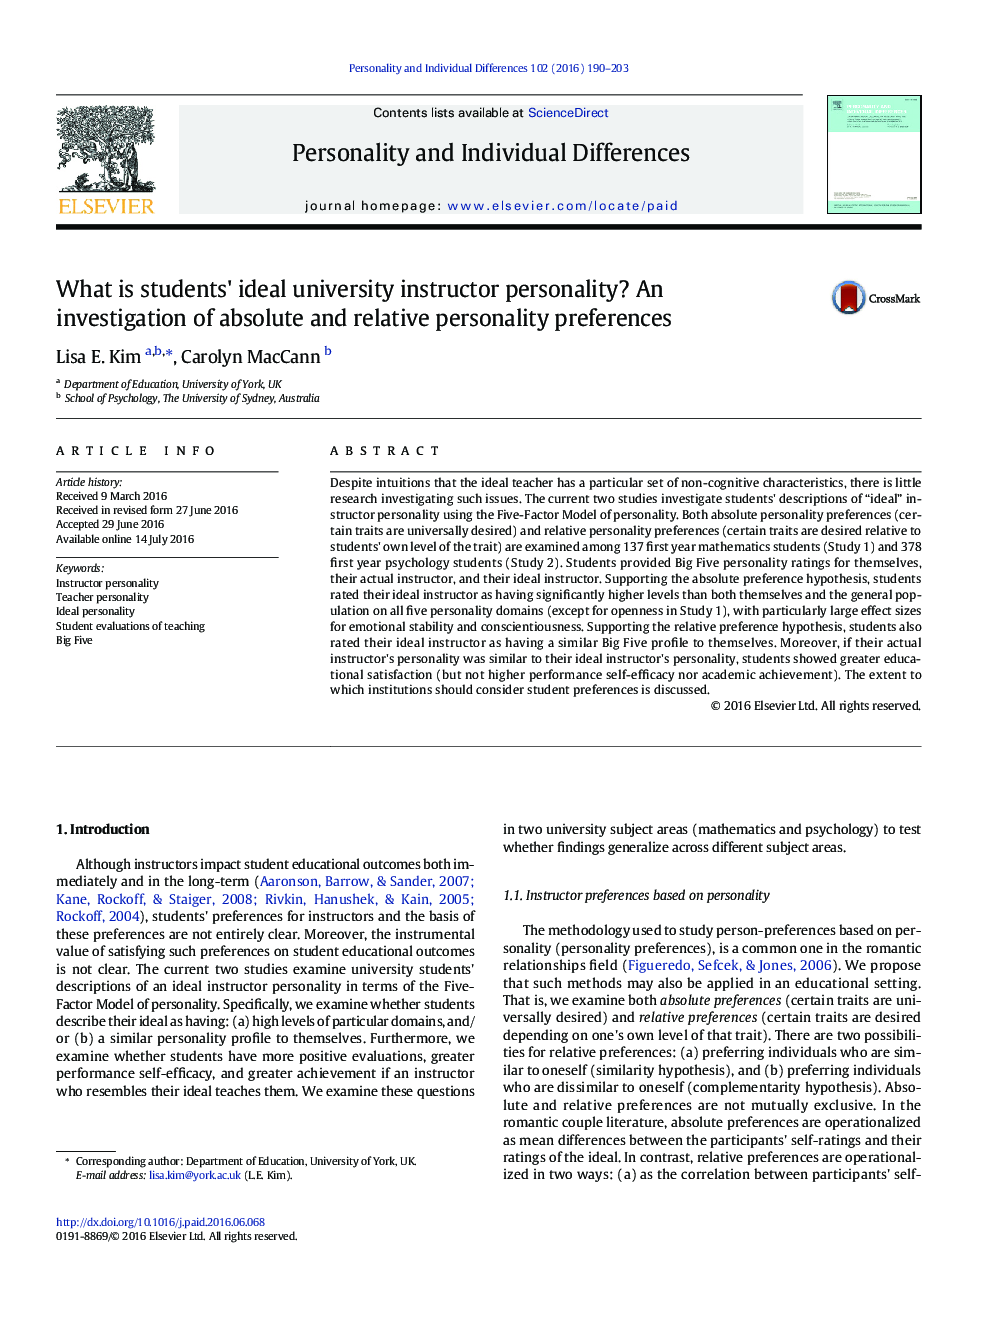 What is students' ideal university instructor personality? An investigation of absolute and relative personality preferences